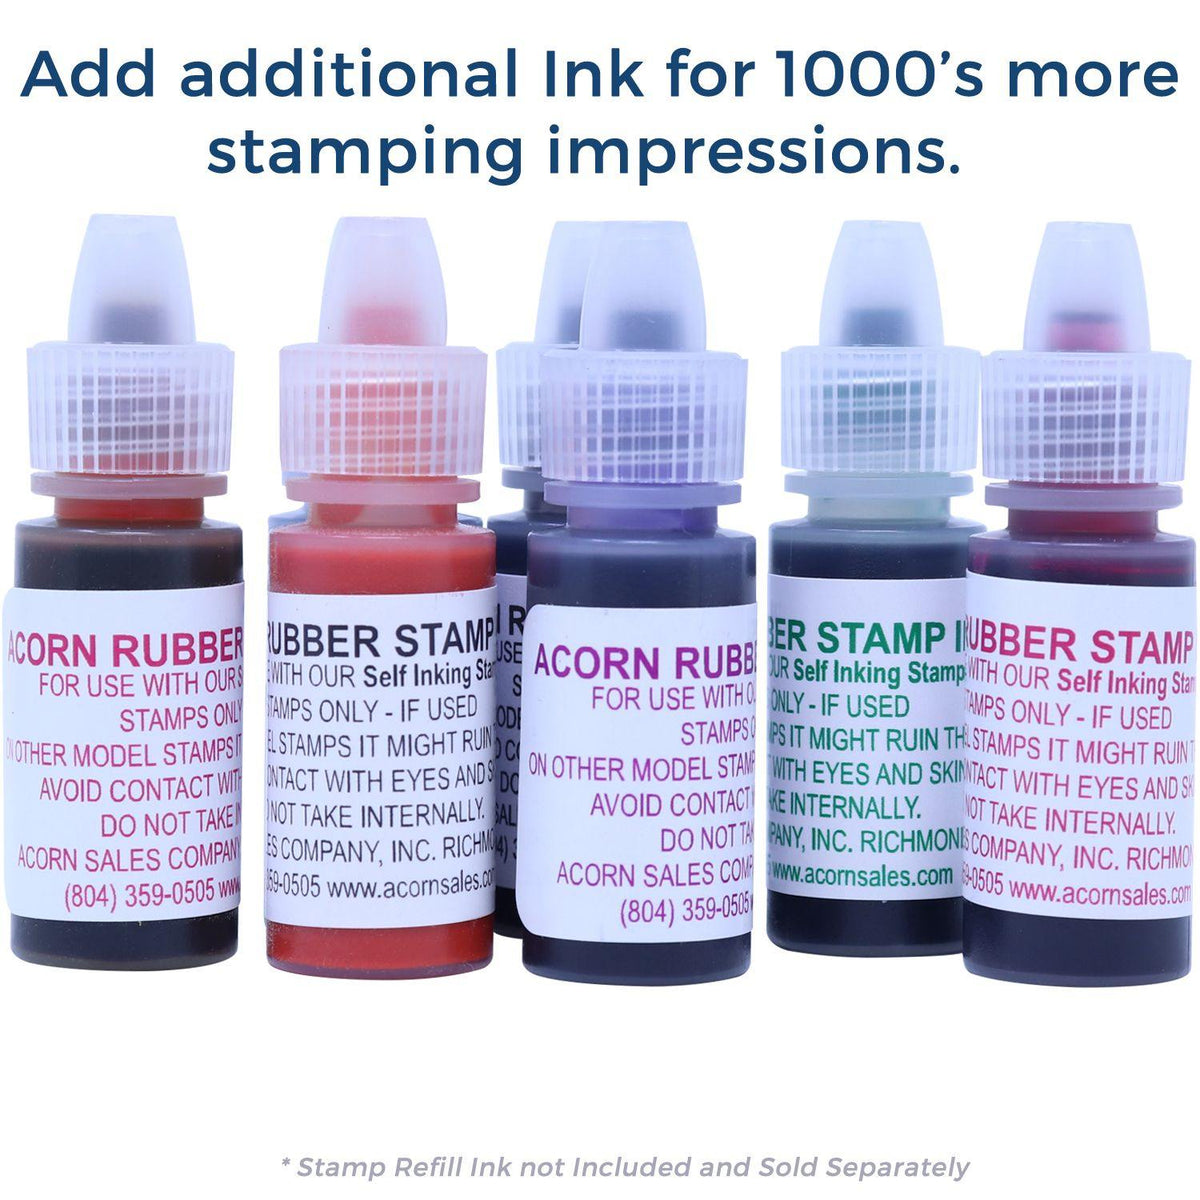 Refill Inks for Large Pre-Inked Avis De Receiption Stamp Available